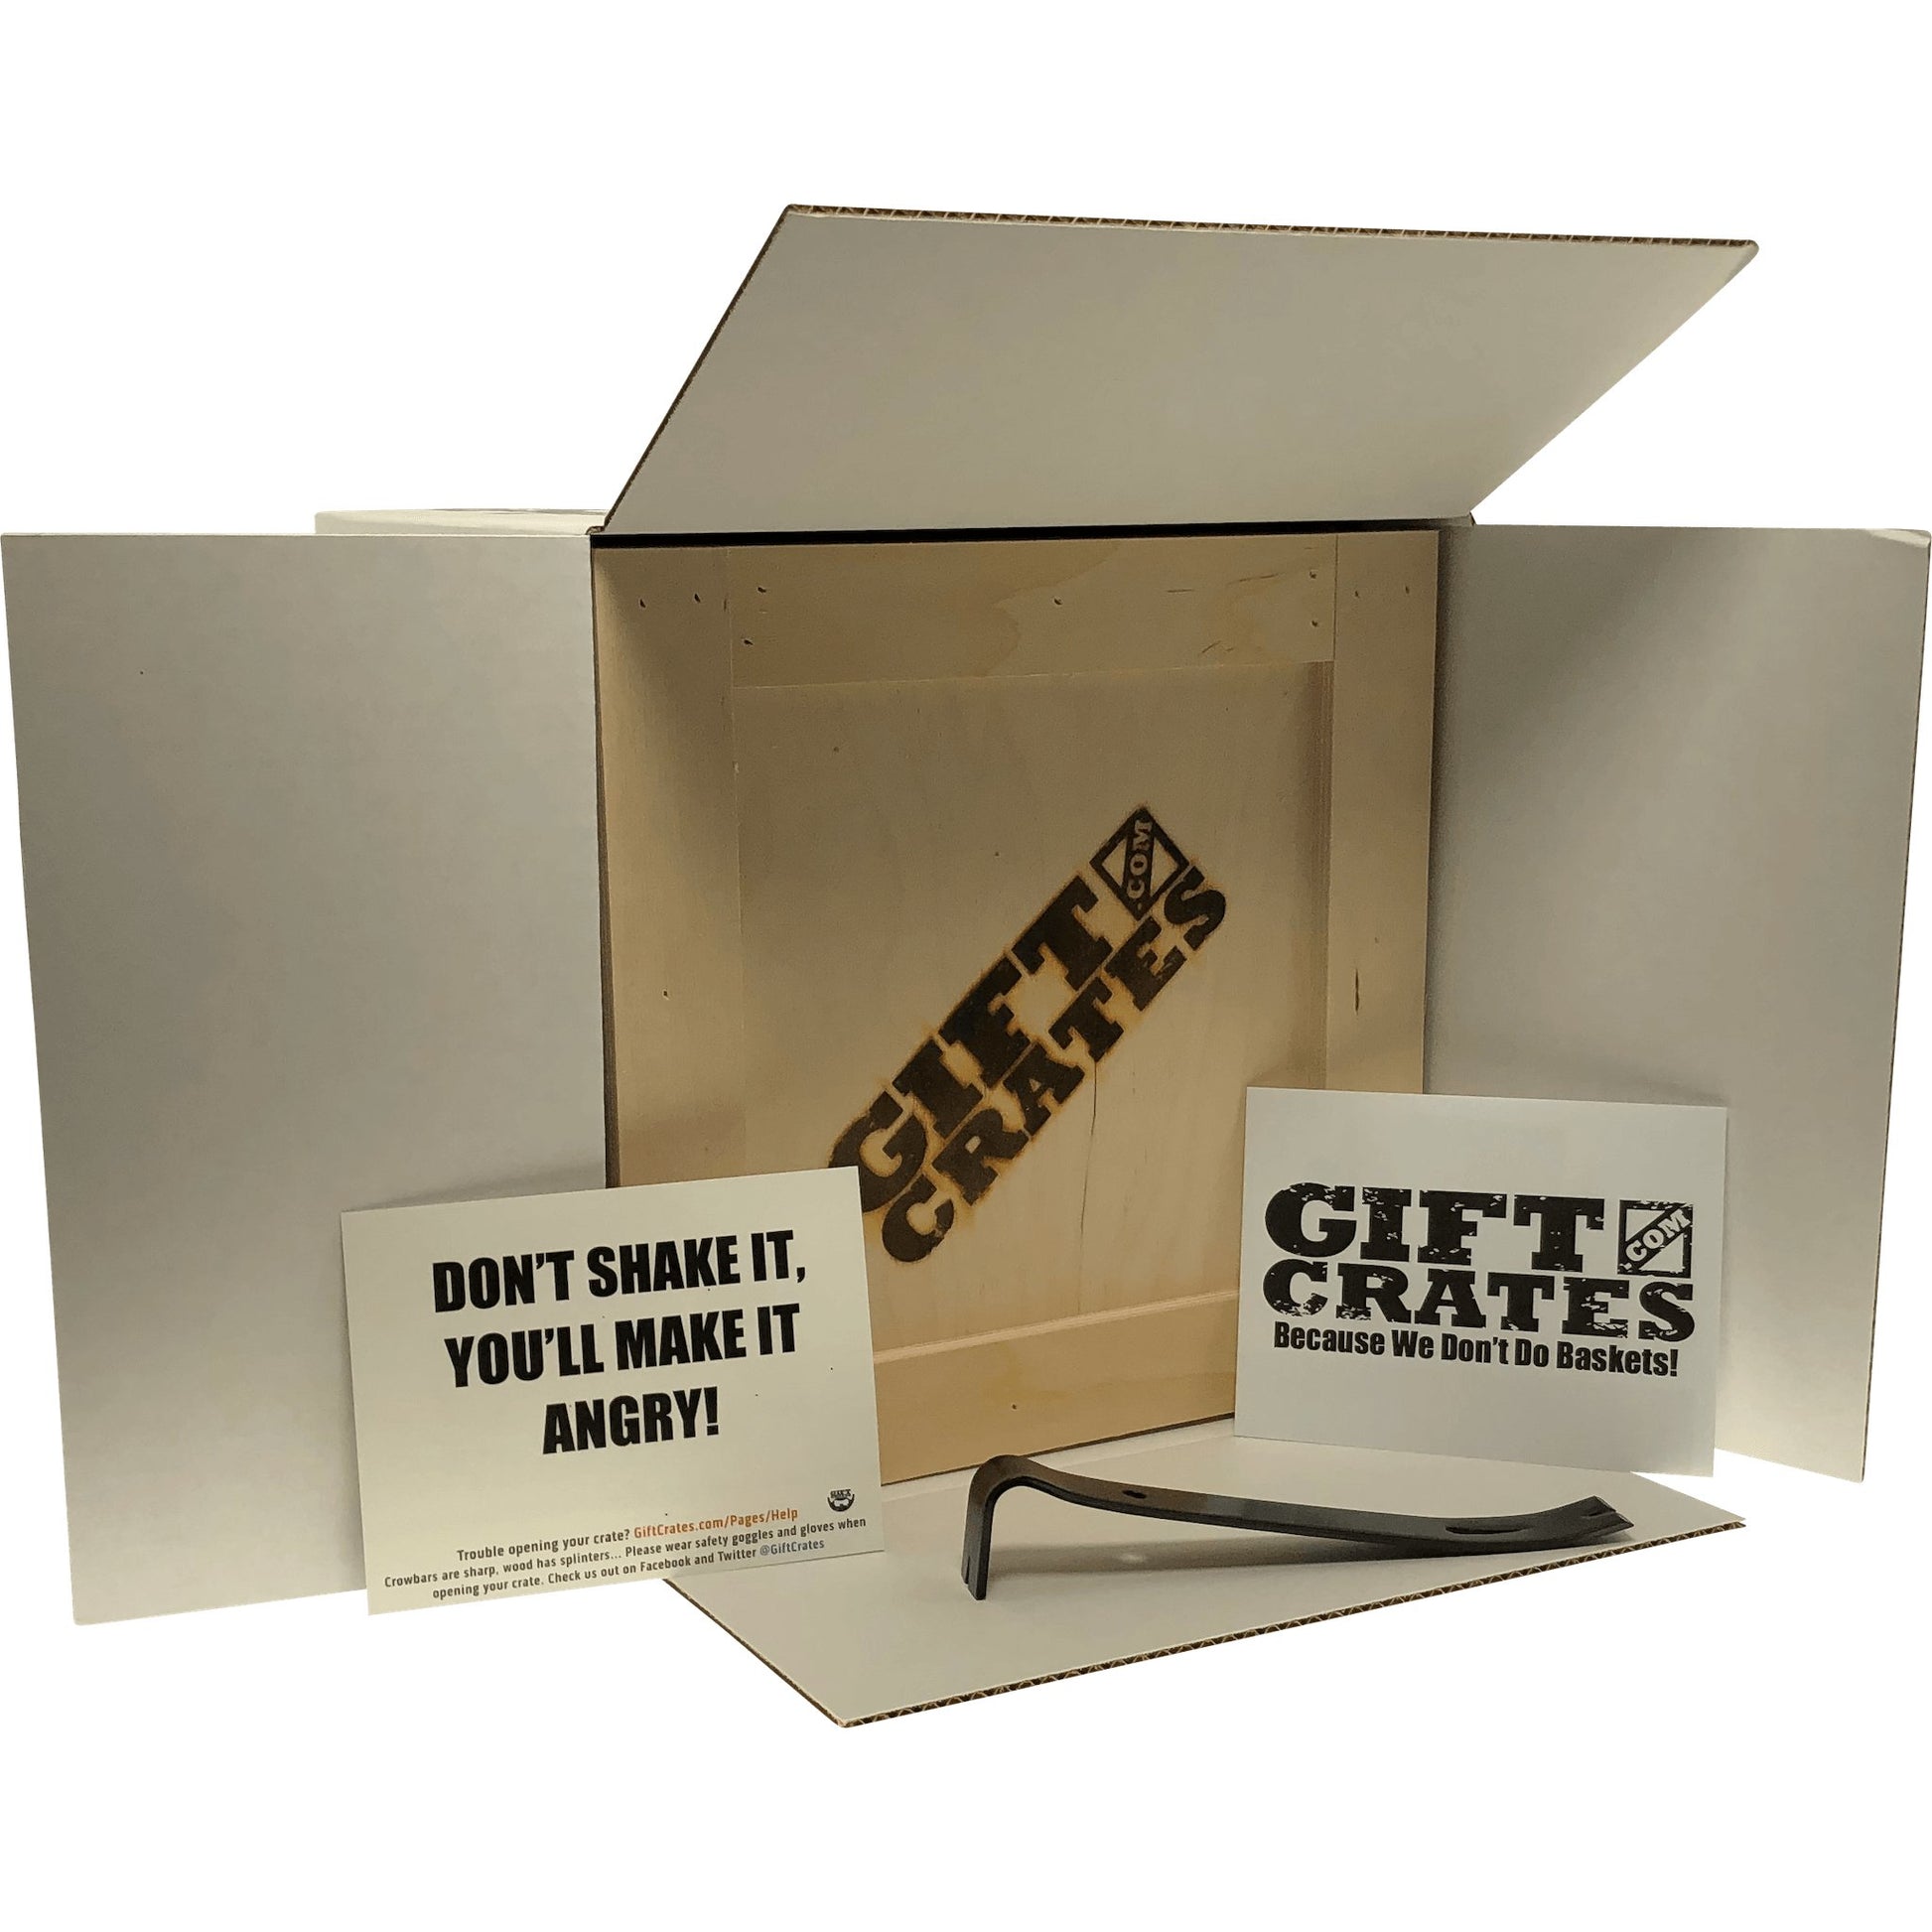 Snack Attack Crate - Gift Crates